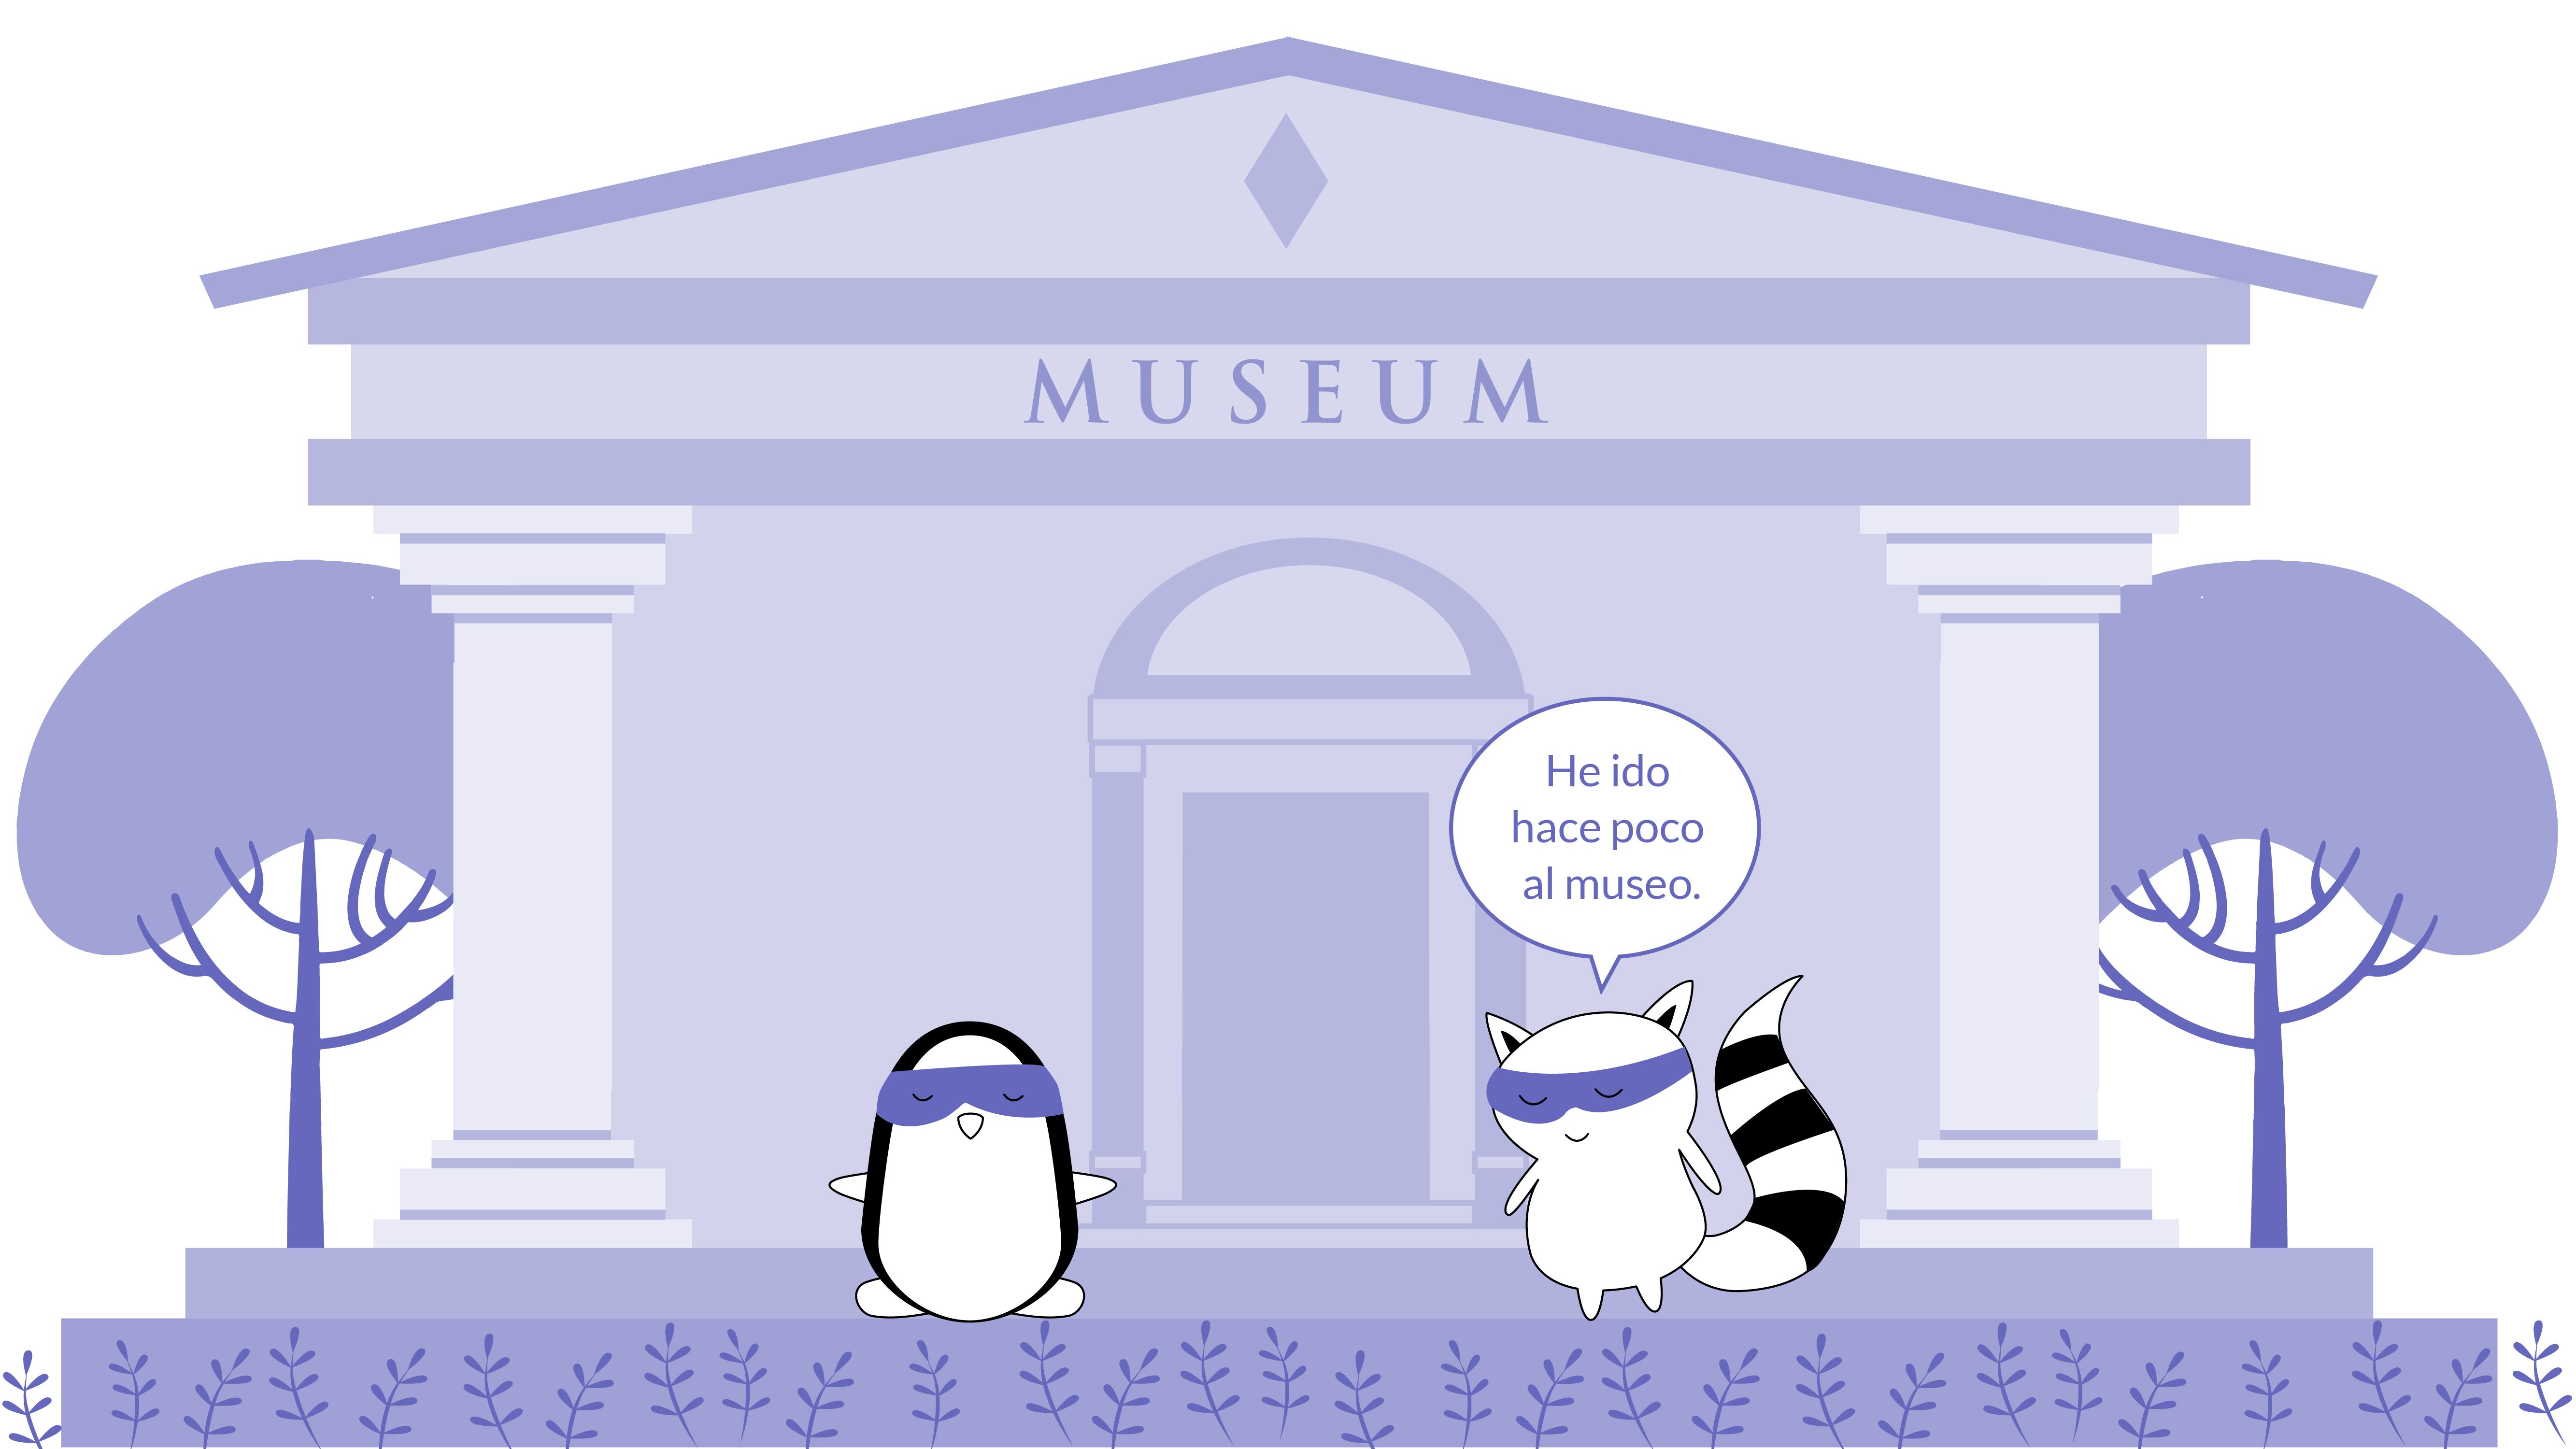 Benji tells Pocky, “He ido hace poco al museo,” with the museum behind them.